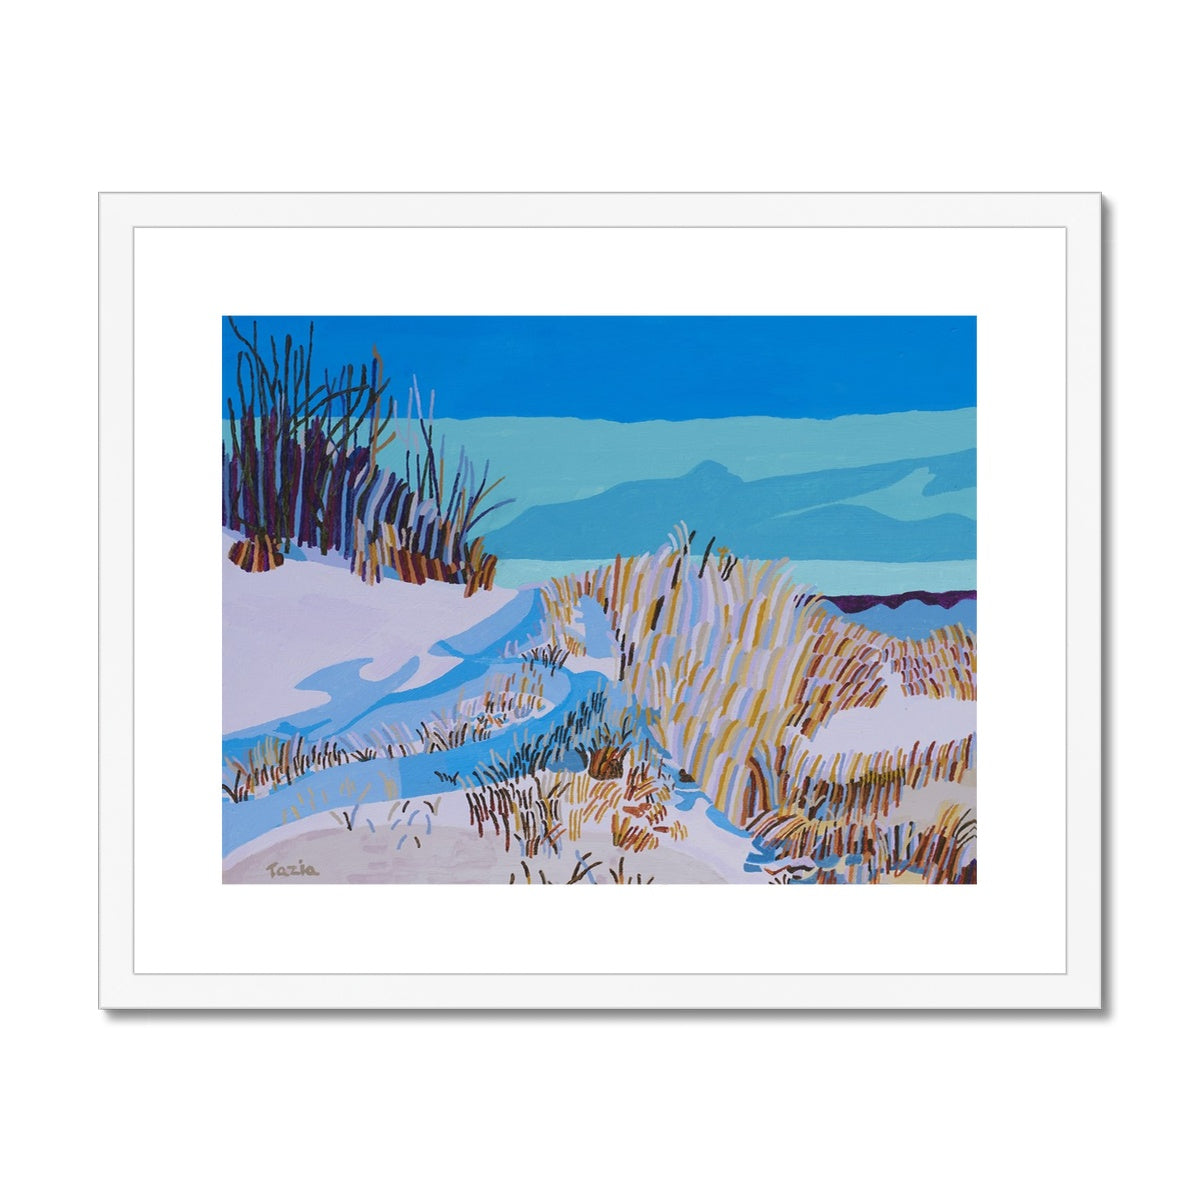 Snow in Norway, Framed & Mounted Print